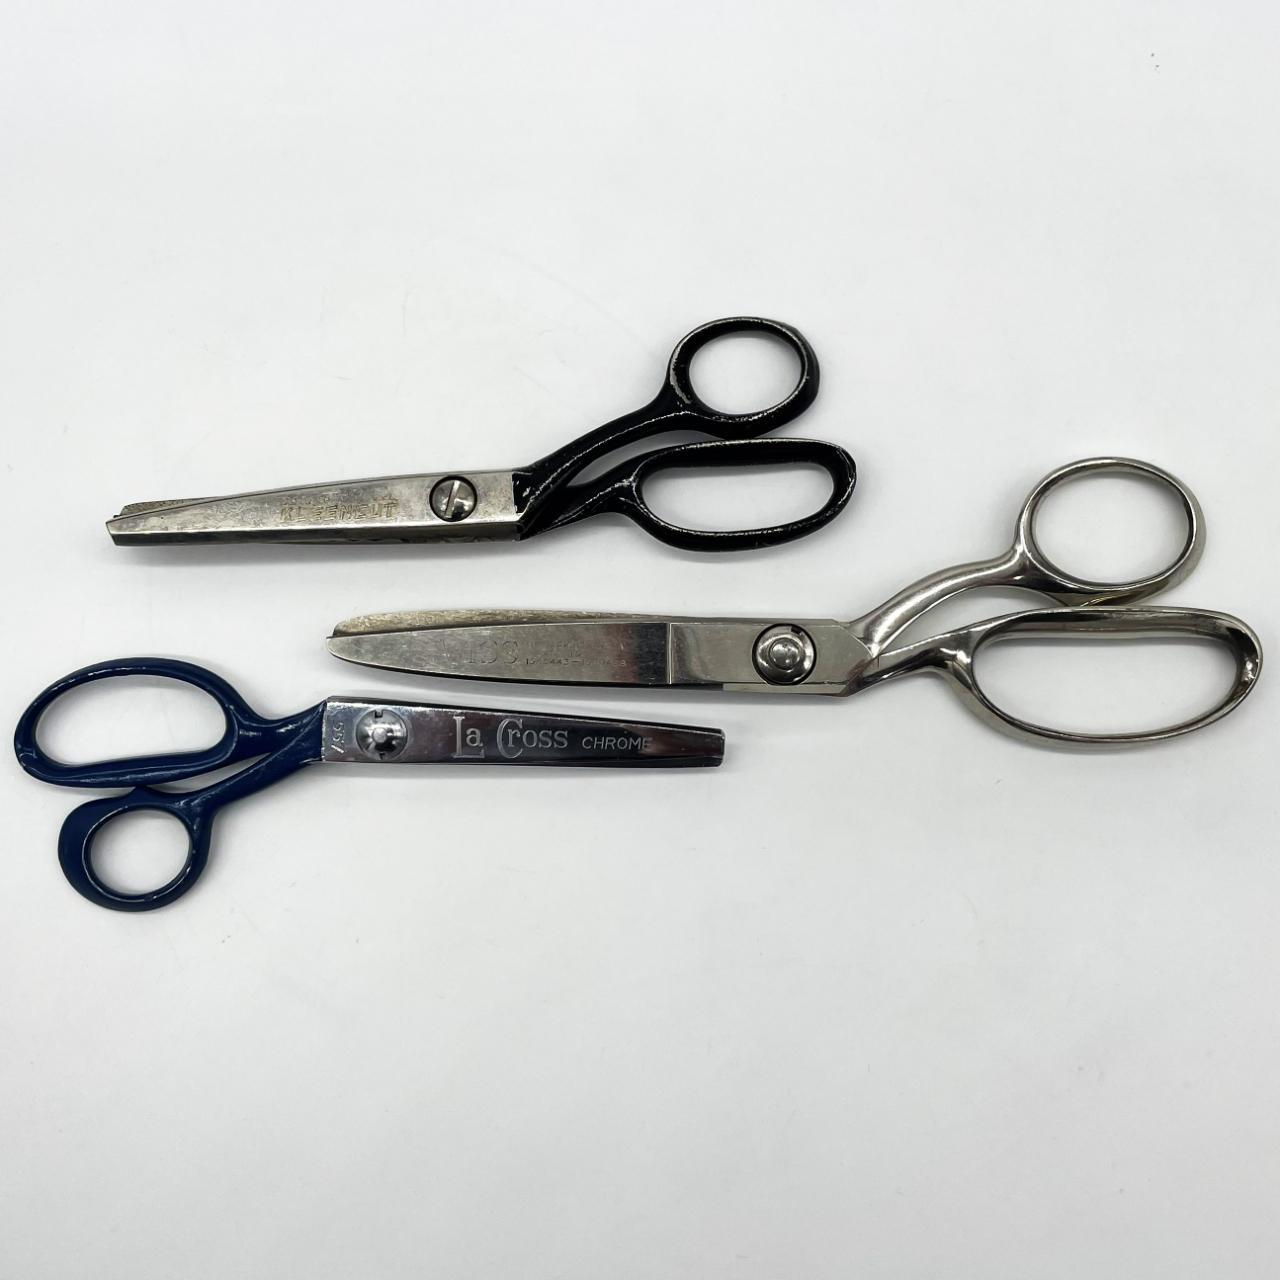 Vintage Pinking Shears Scissors by Del 